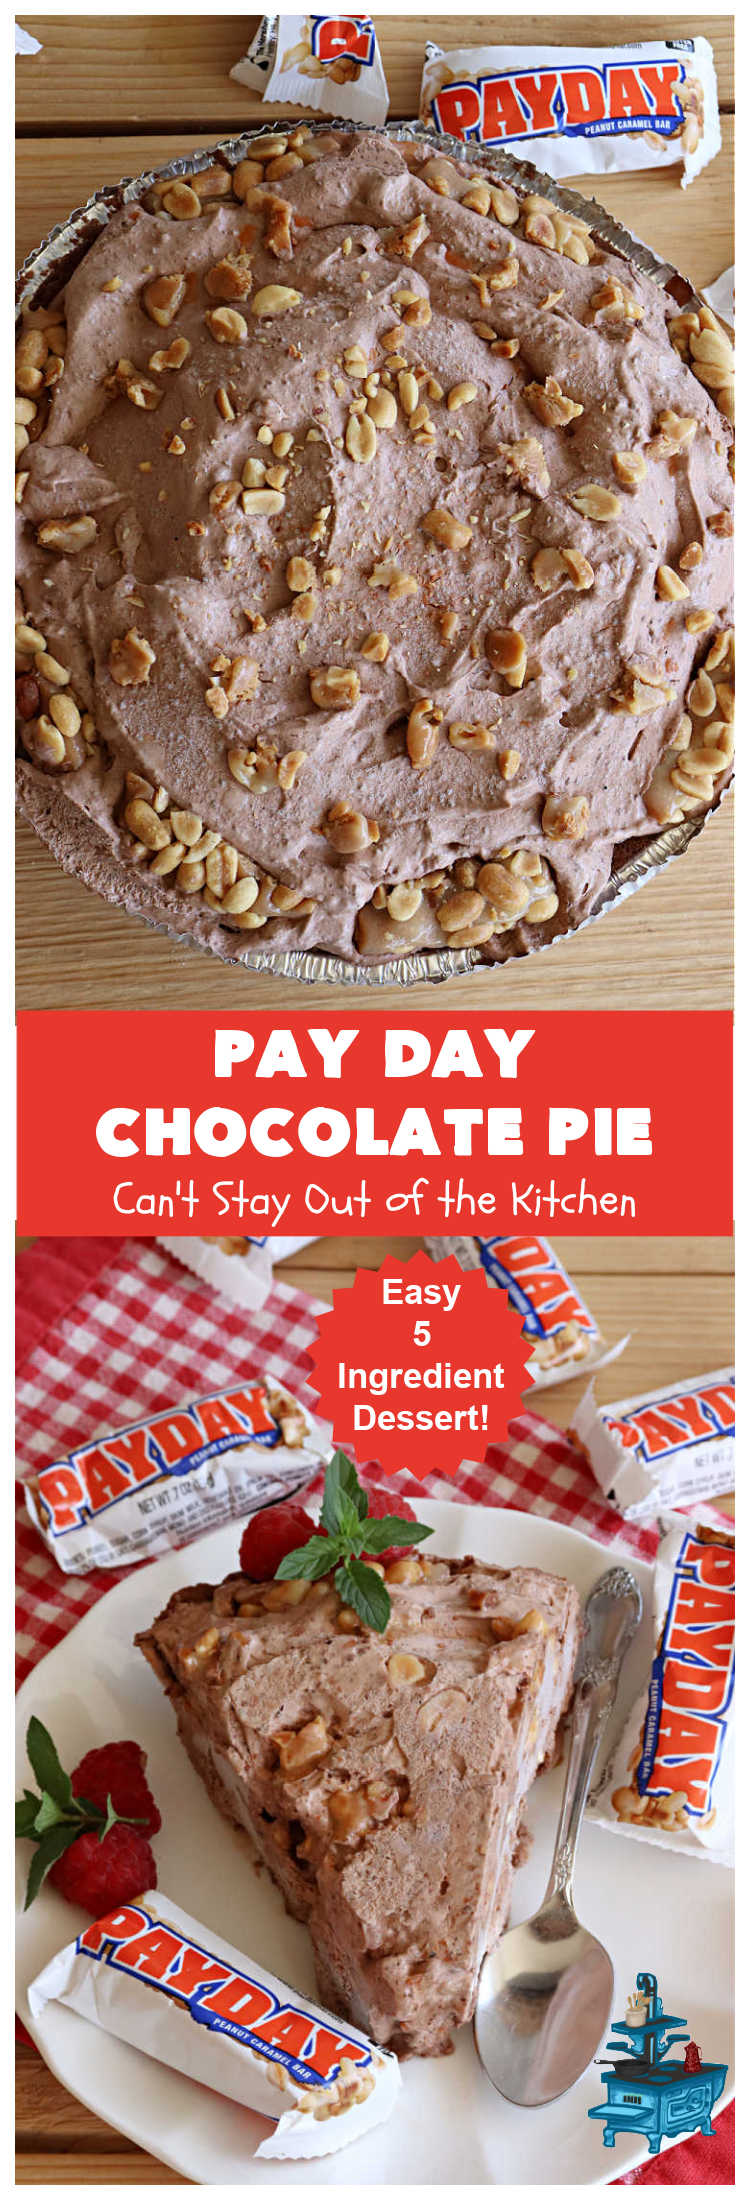 Pay Day Chocolate Pie | Can't Stay Out of the Kitchen |  this swoon-worthy #ChocolatePie uses only 5 ingredients including #PayDayBars. Wonderful for #holiday or company dinners & so easy to make. #peanuts #pie #dessert #HolidayDessert #PayDayChocolatePie